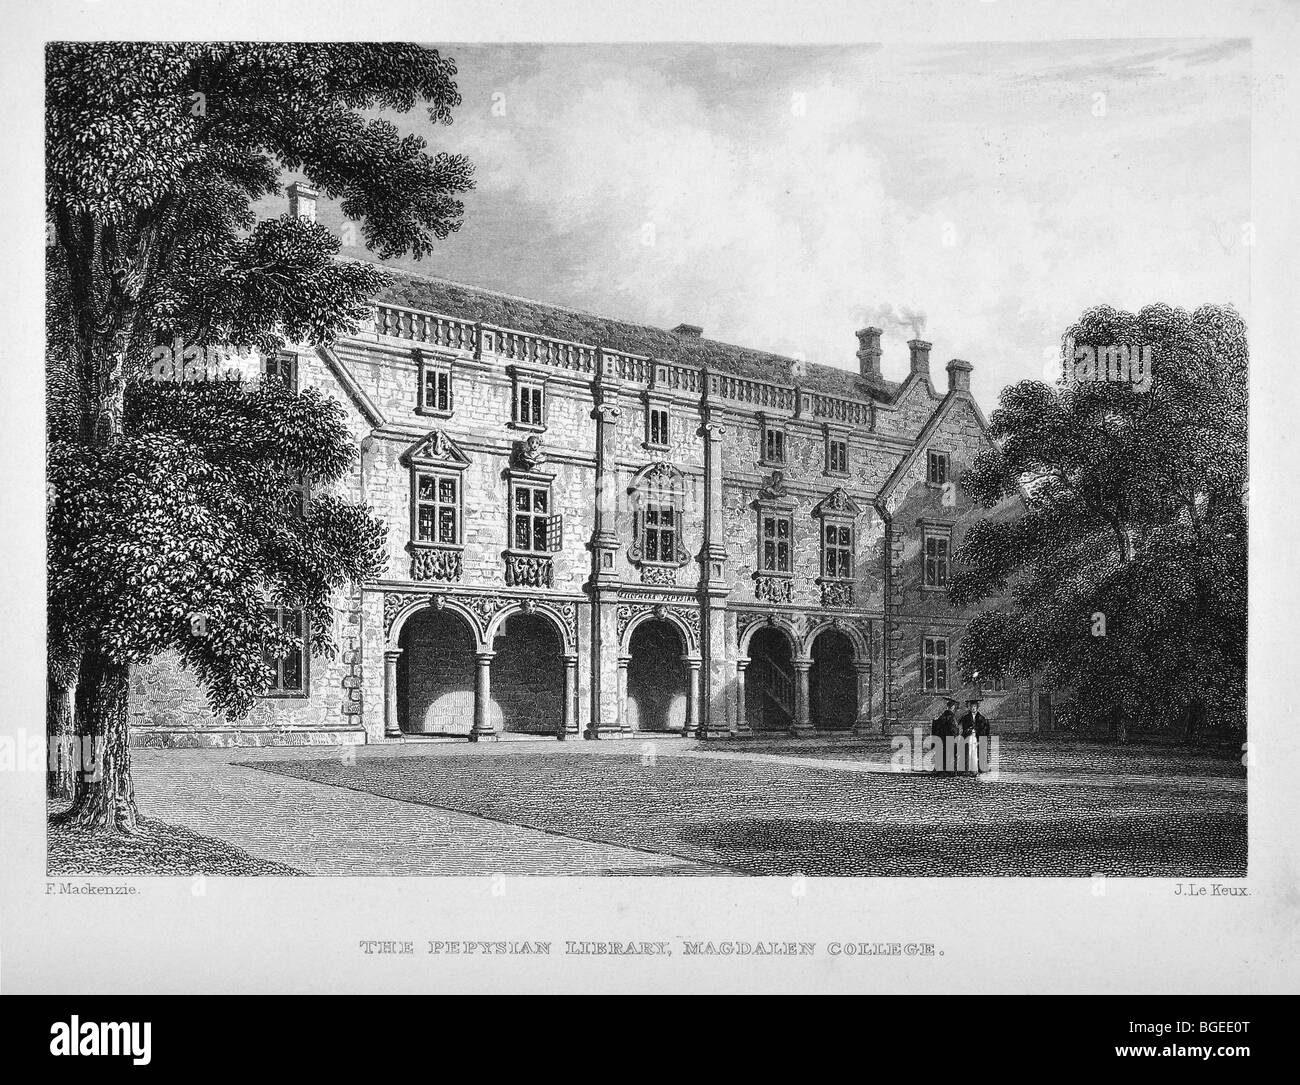 The Pepysian Library, Magdalene College, Cambridge – Pepys Building Stock Photo